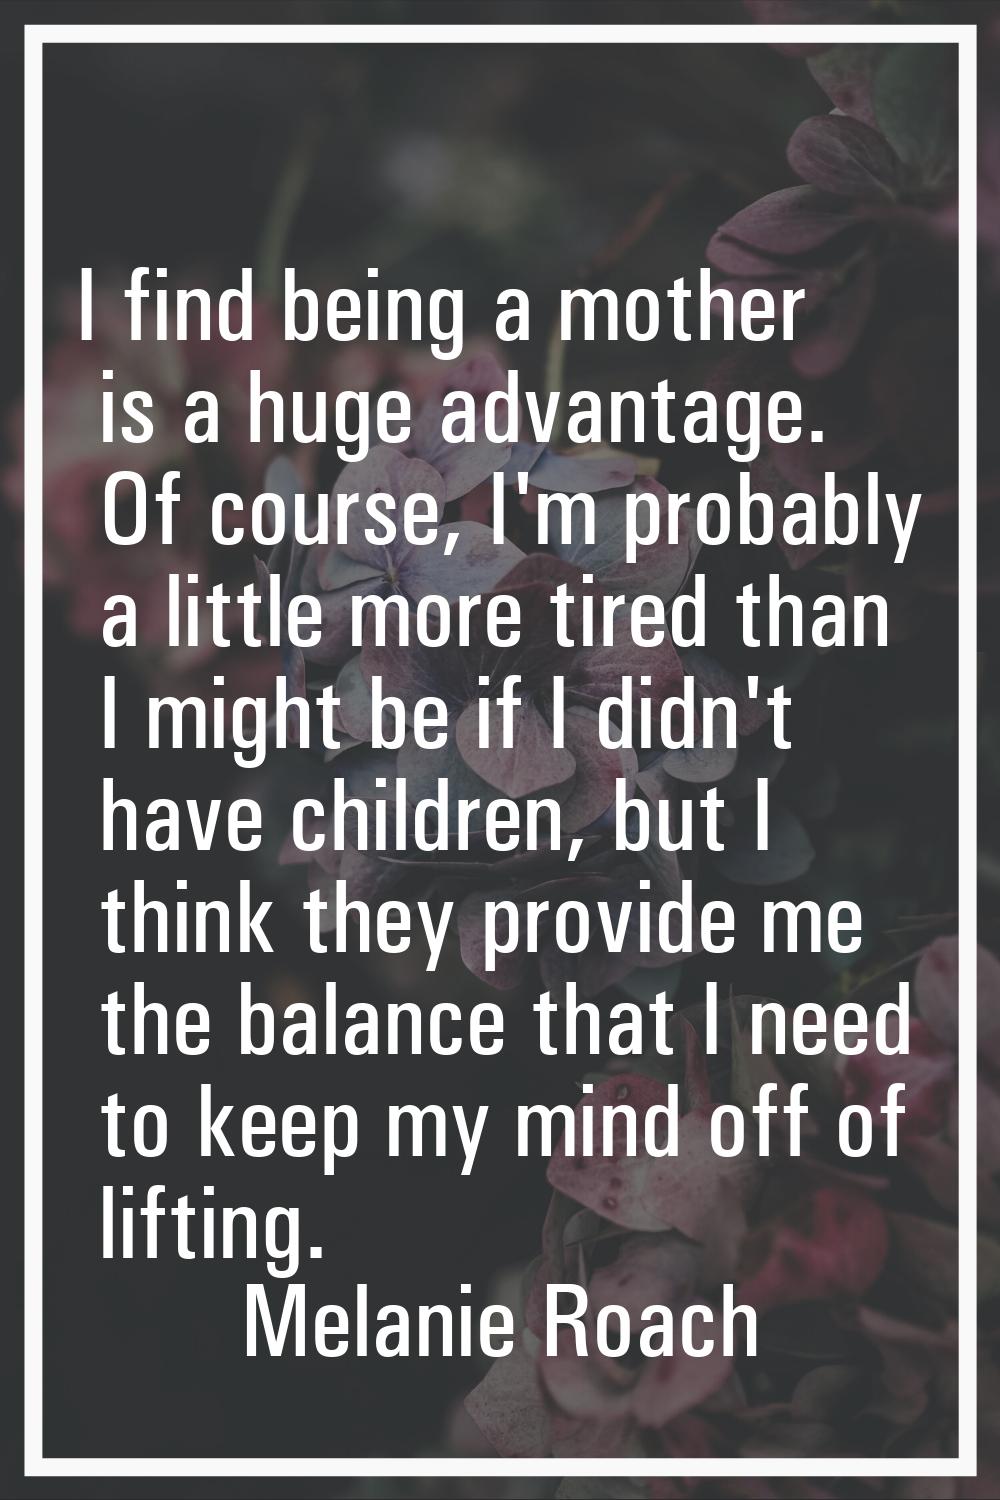 I find being a mother is a huge advantage. Of course, I'm probably a little more tired than I might